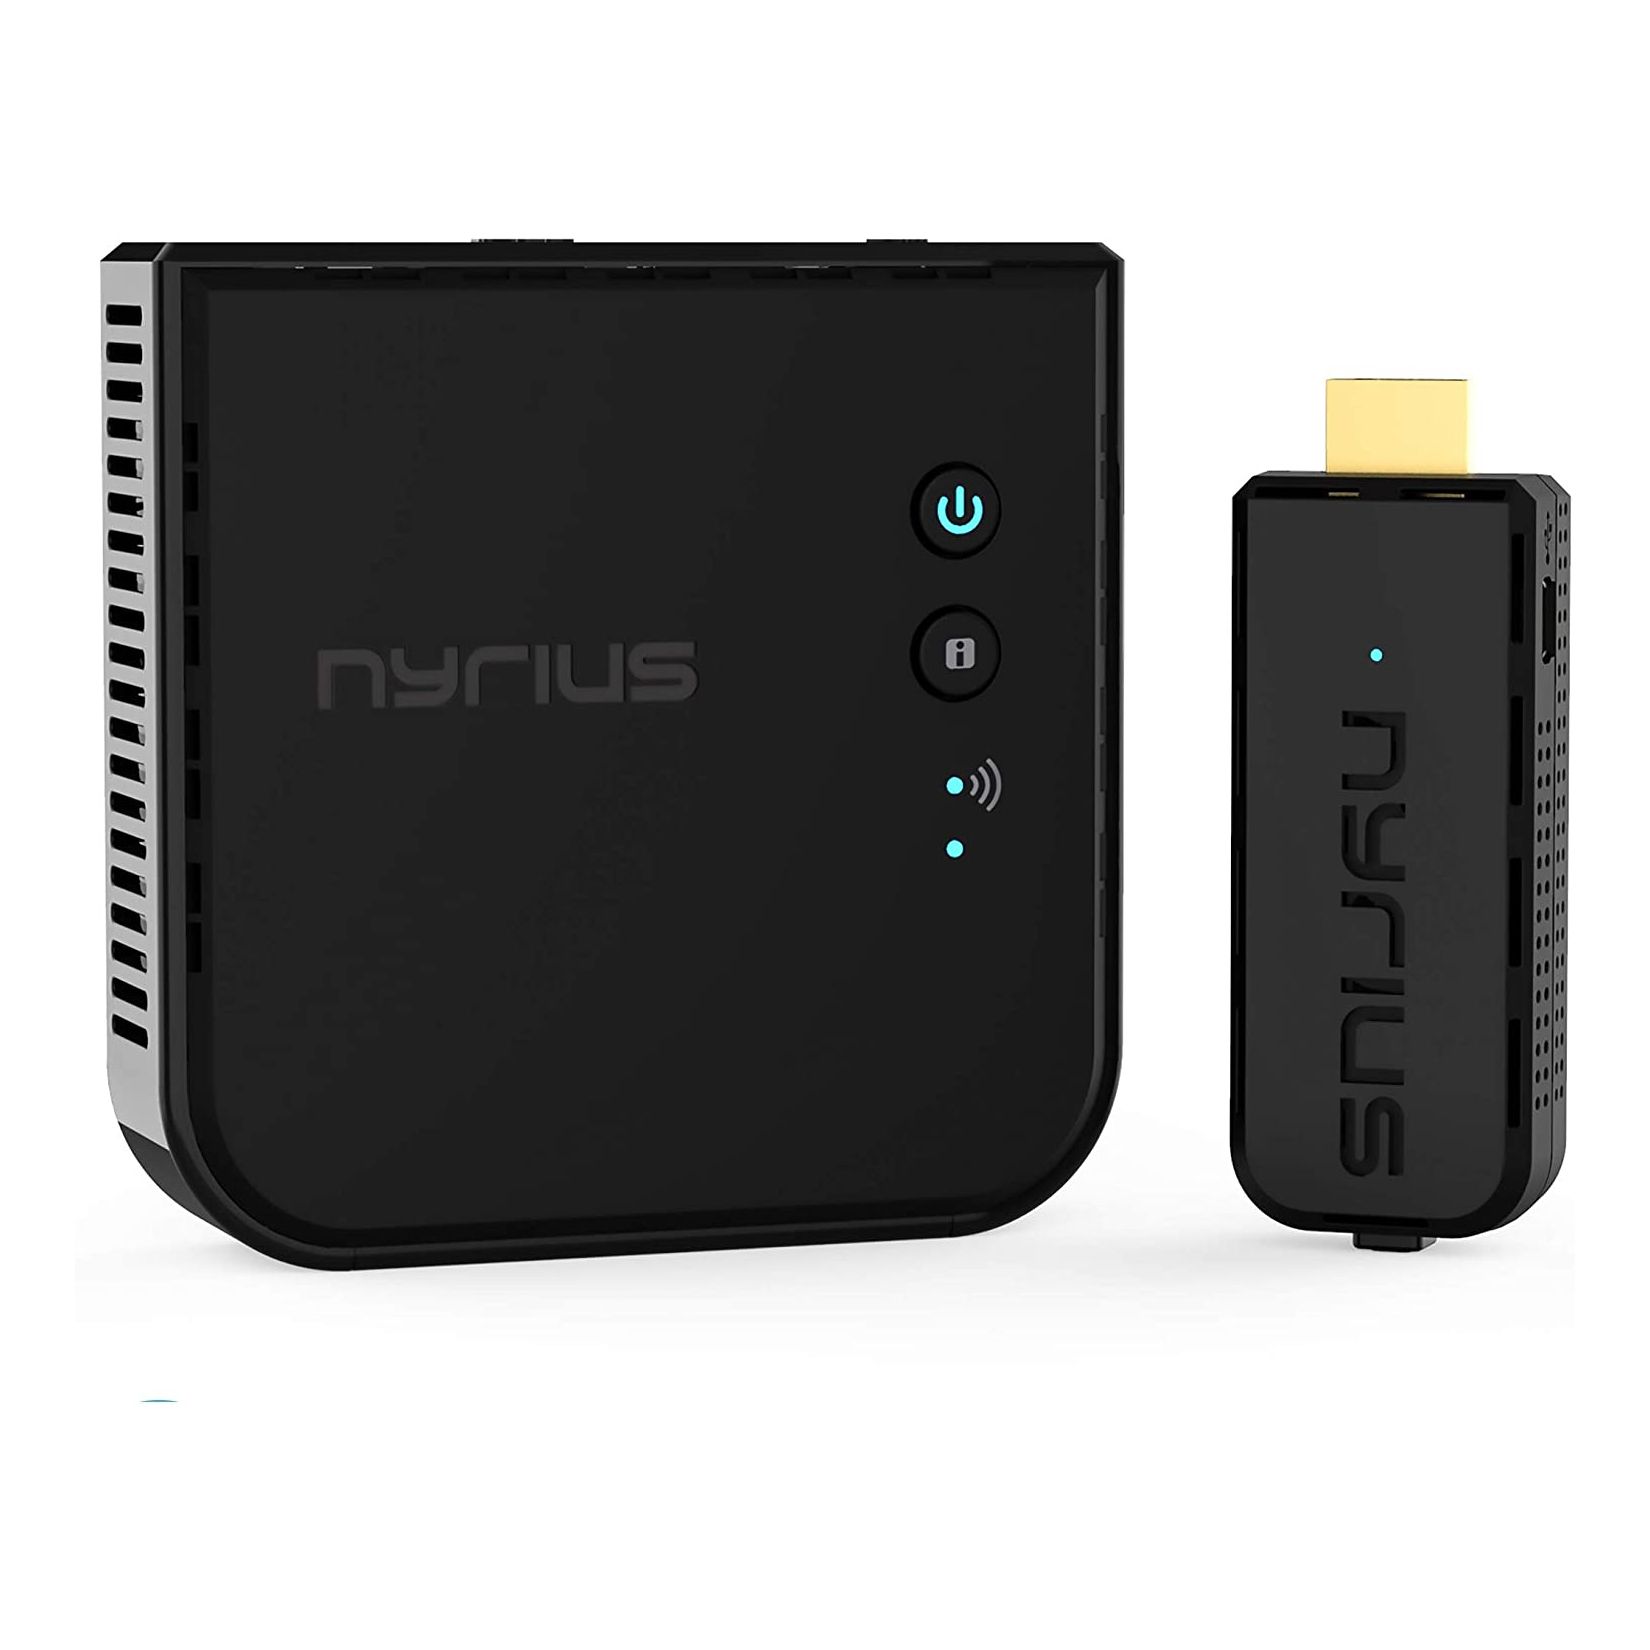 Nyrius Aries Prime Wireless HDMI Transmitter and Receiver 01